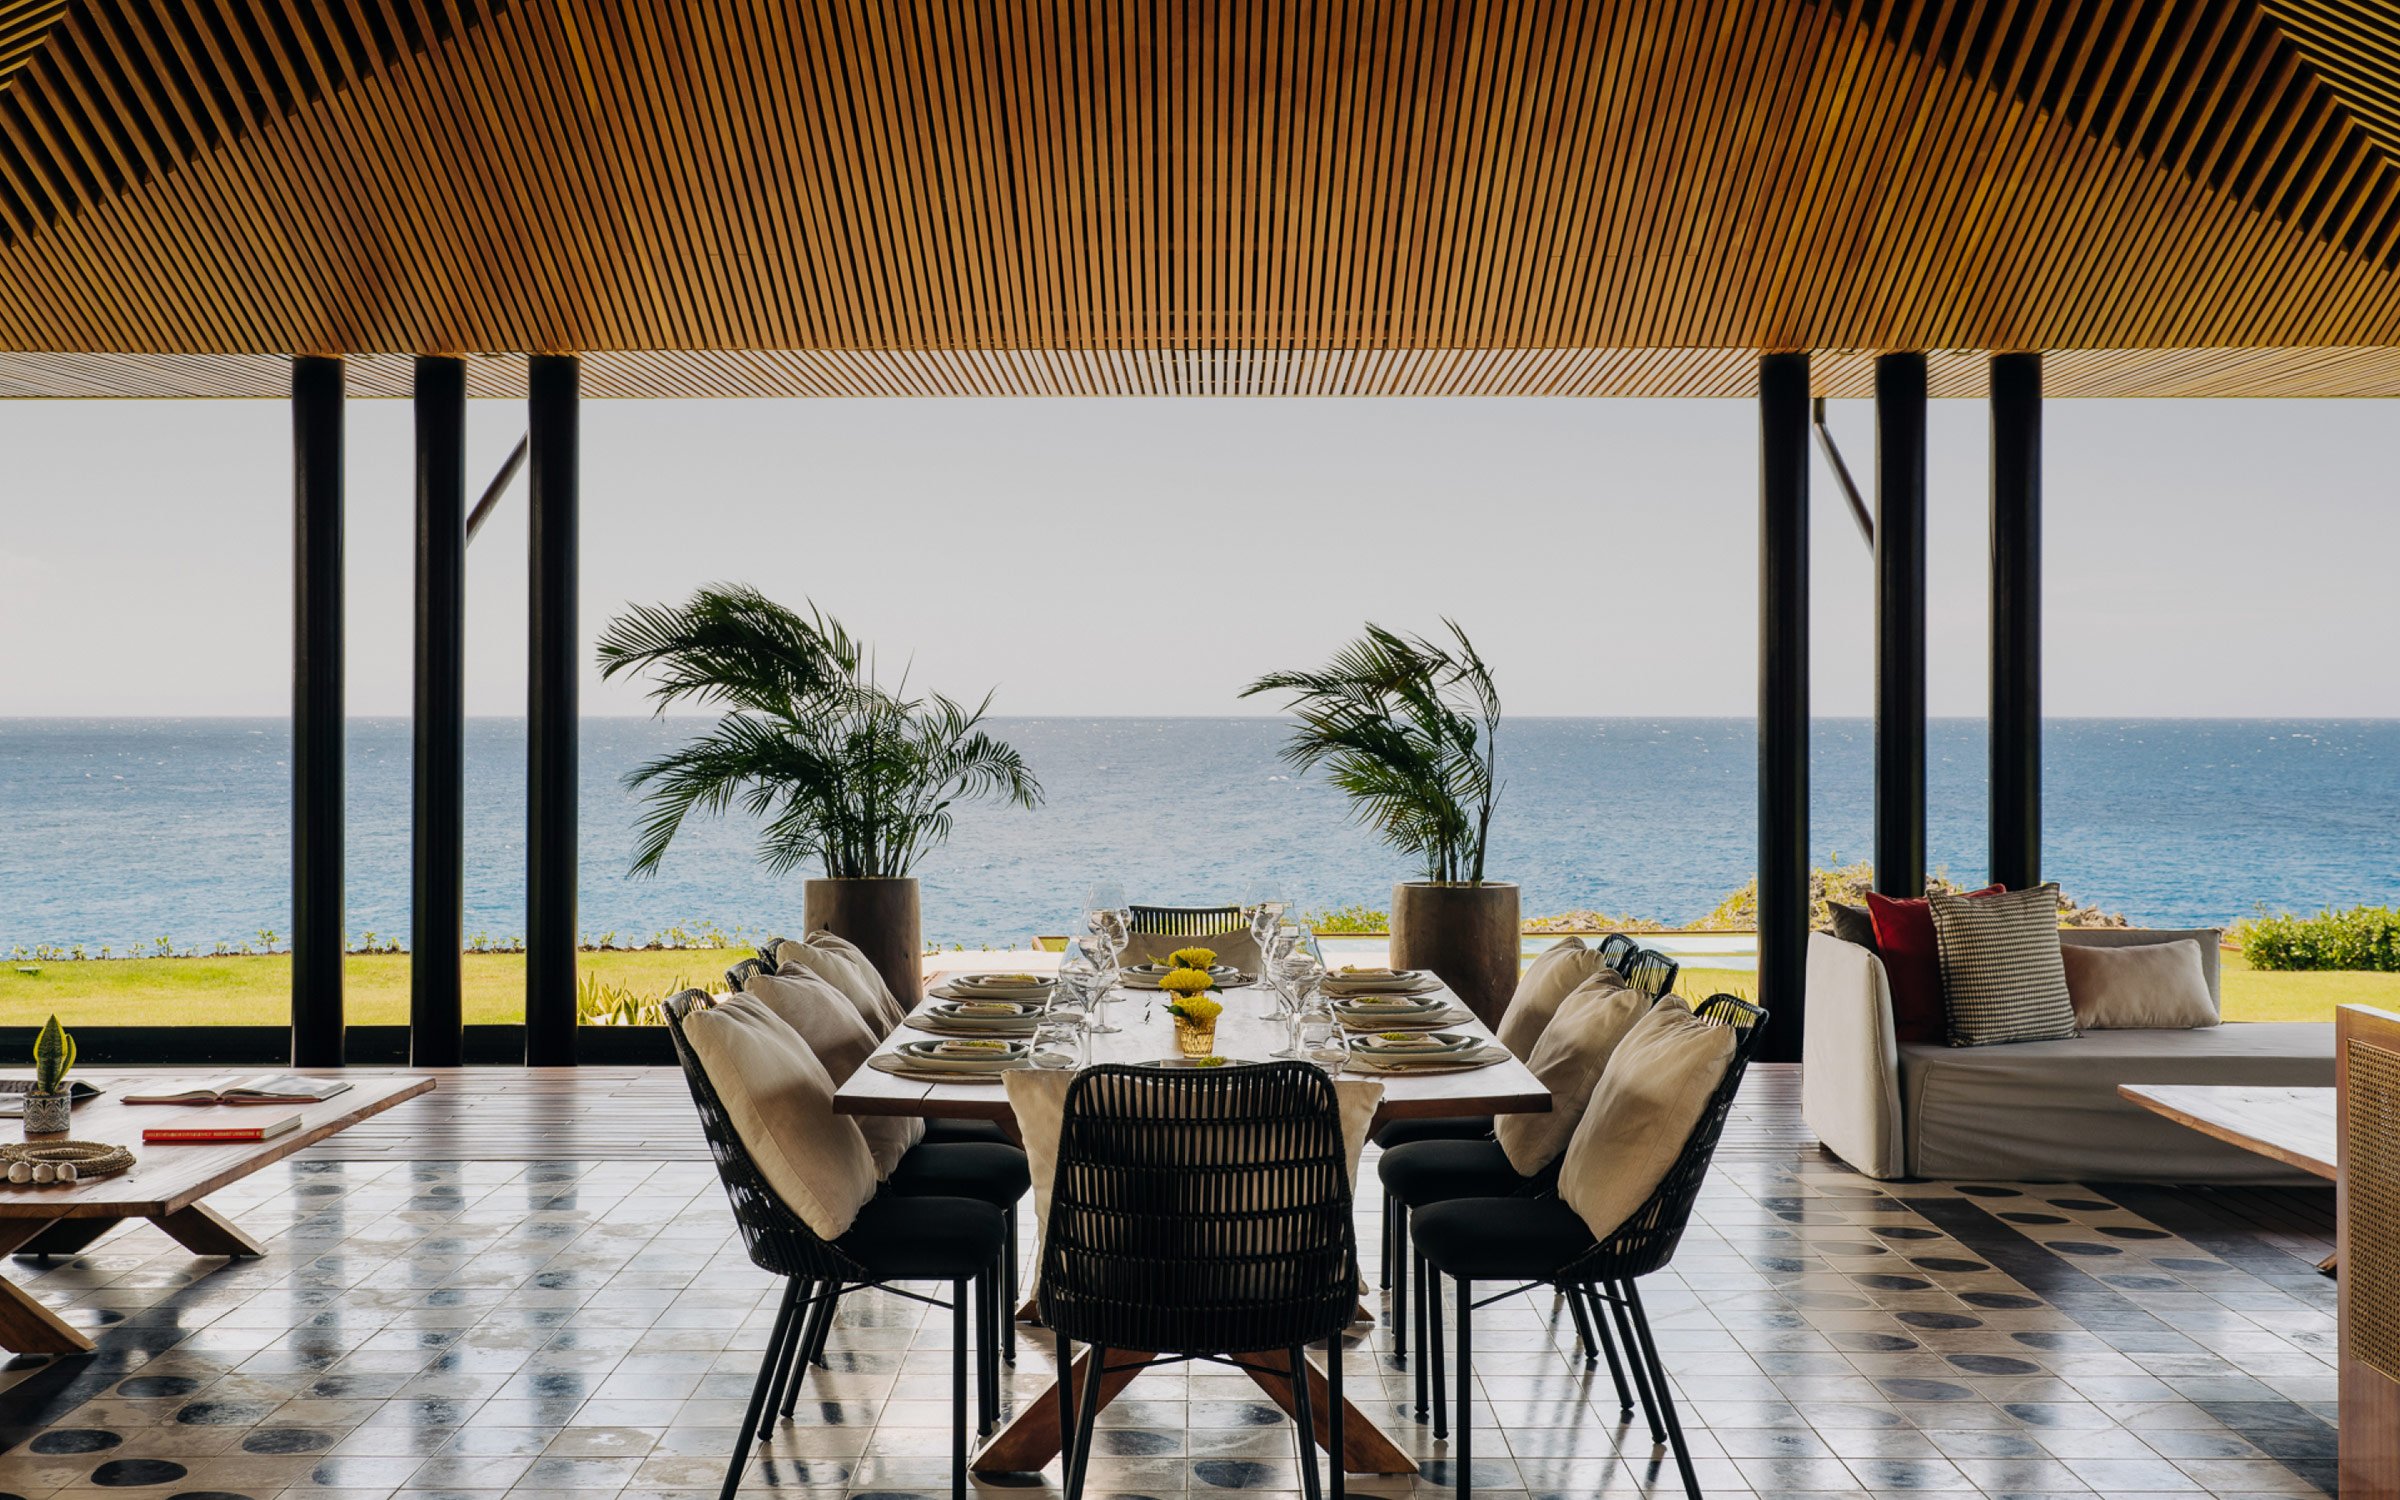 Private Dining Area - Overlooking the Sea